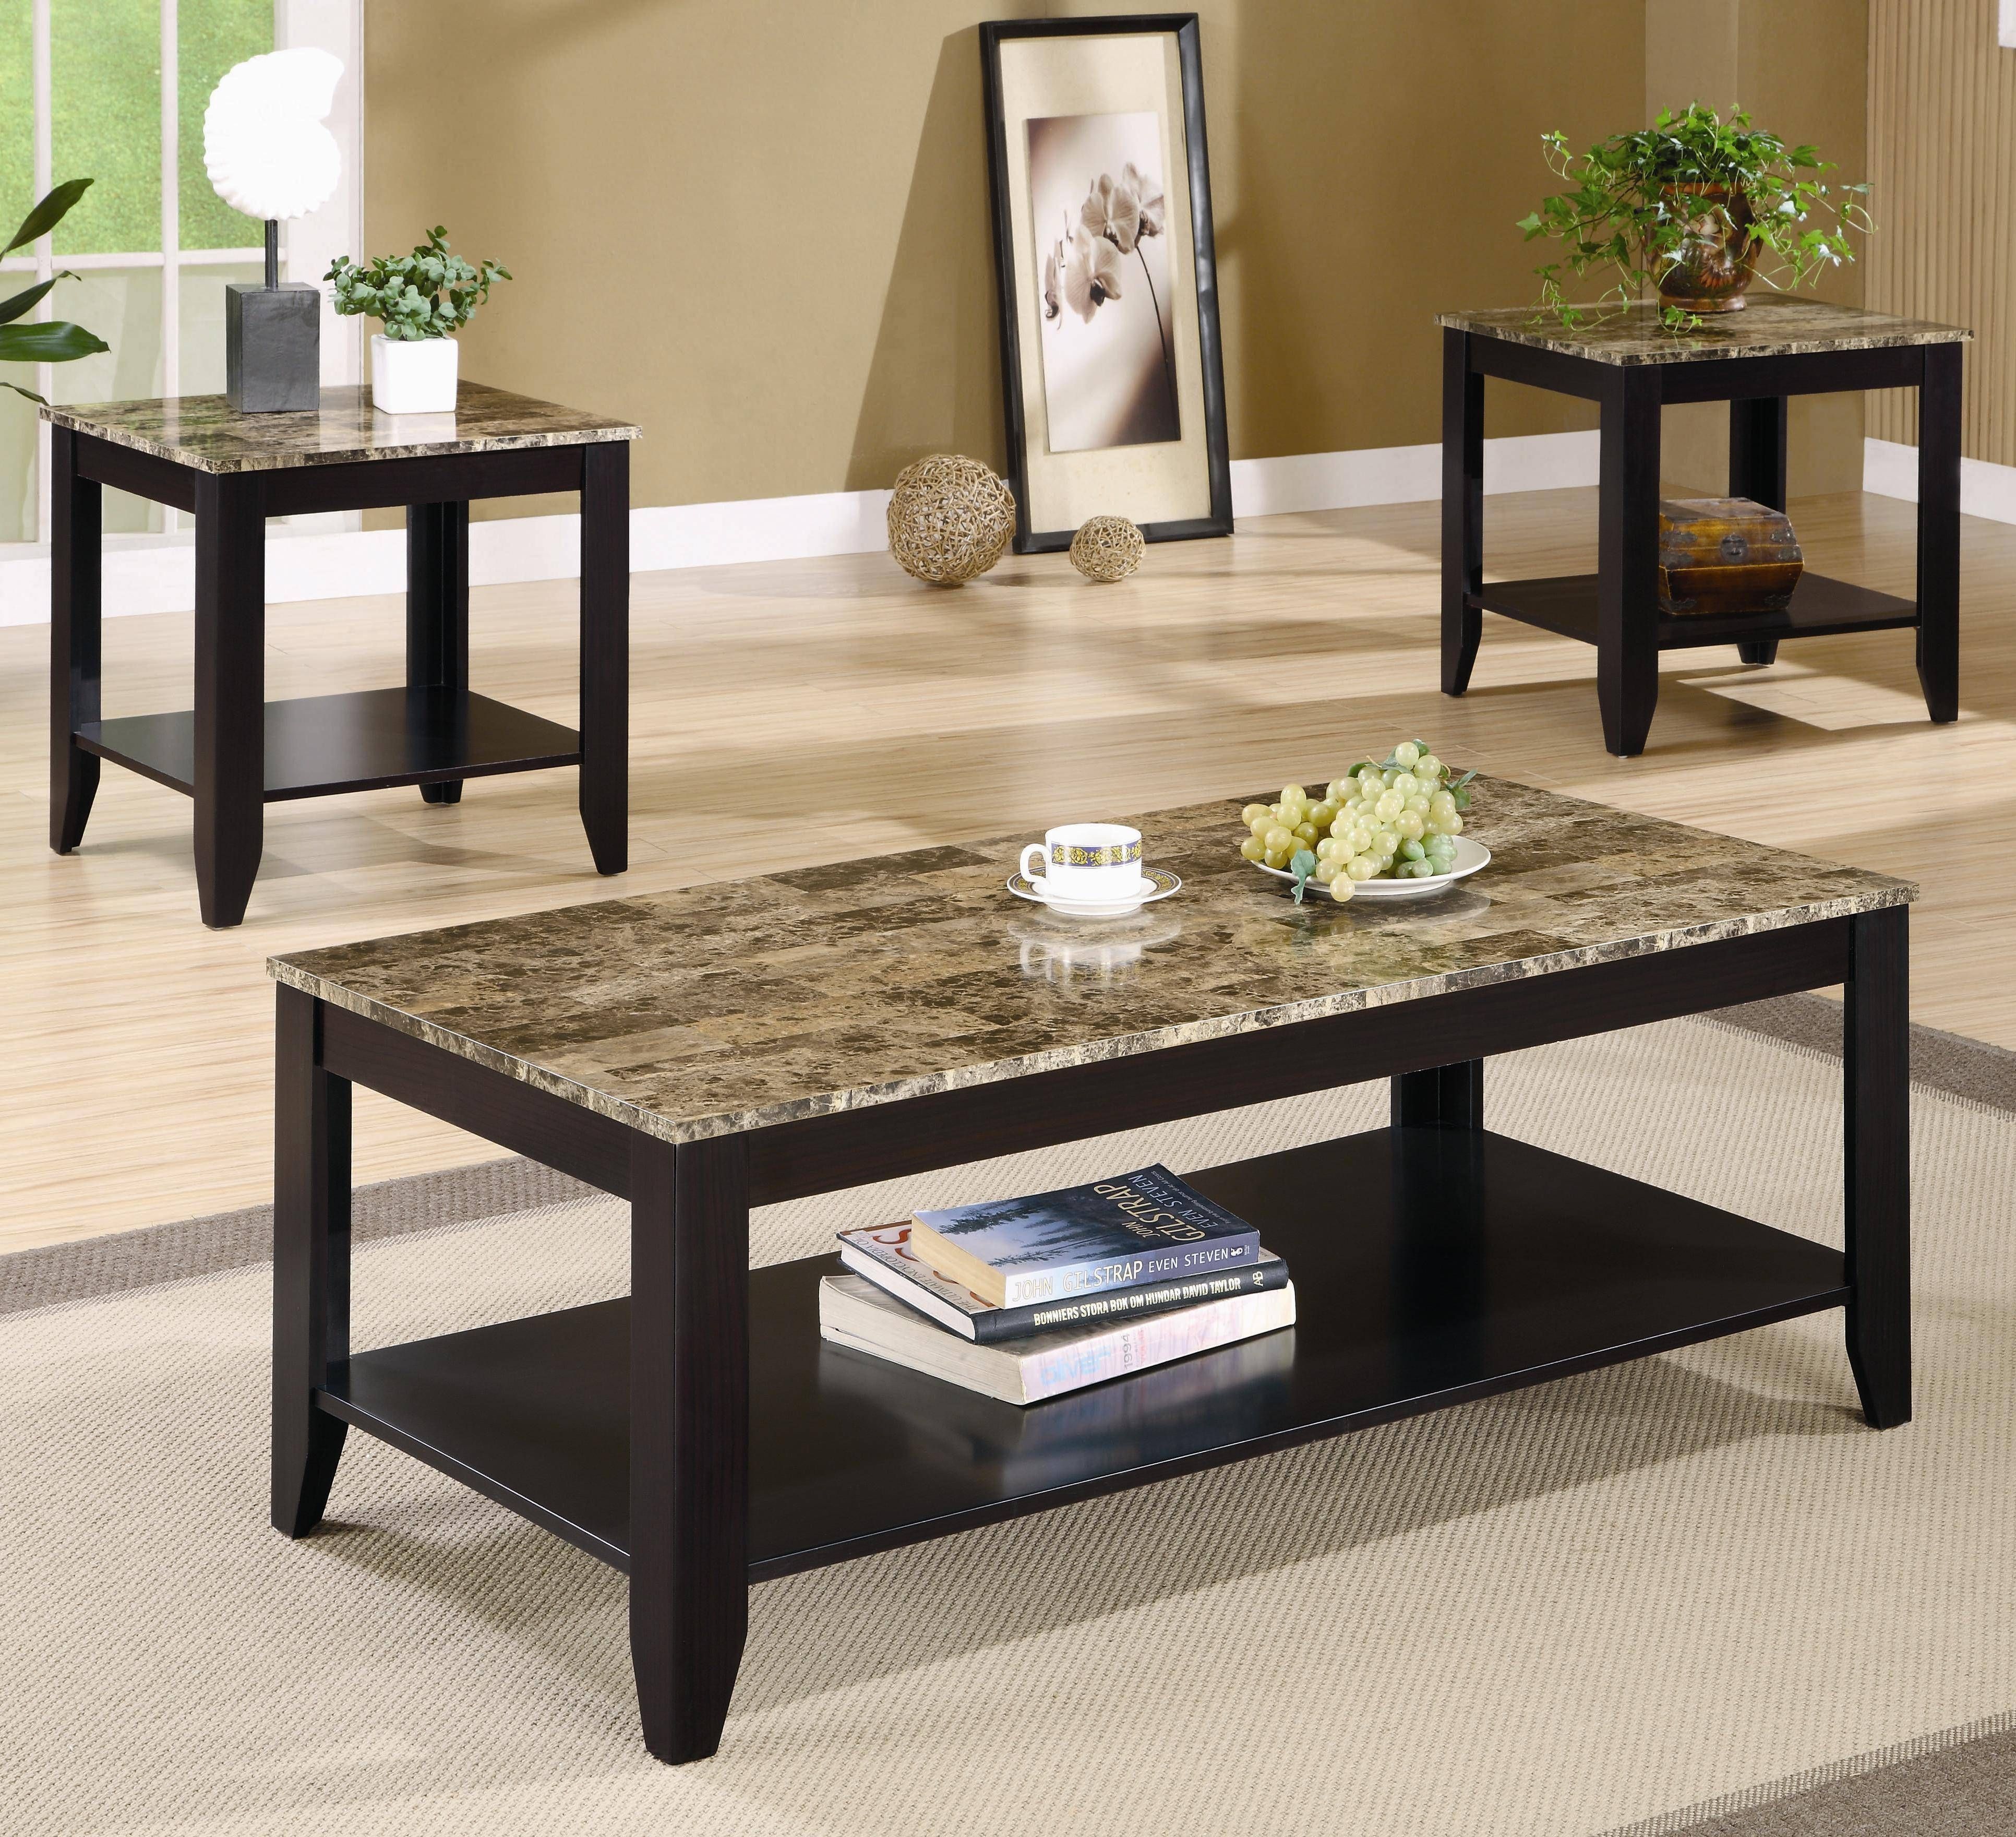 Living Room Coffee Table And End Tables | Coffee Tables Decoration Inside Coffee Table With Matching End Tables (View 10 of 30)